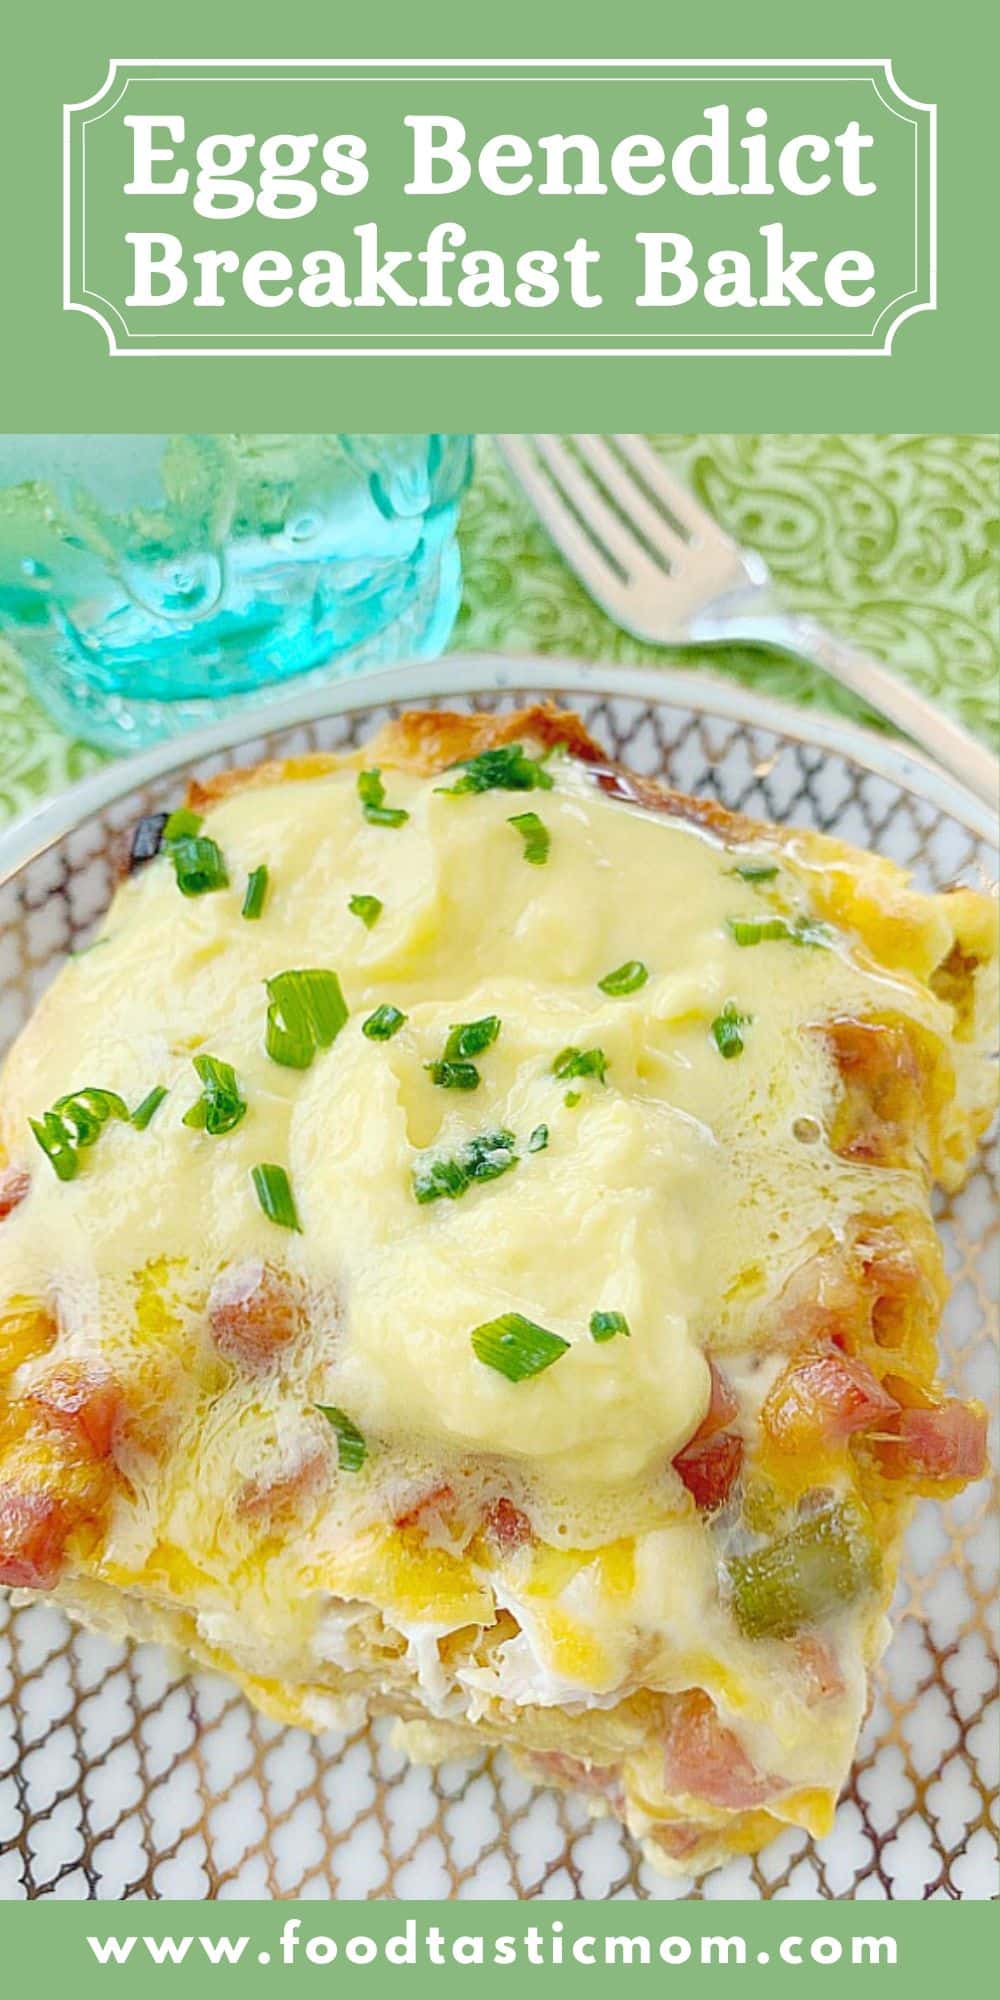 Eggs Benedict Breakfast Bake turns a delicious but fussy classic into a stunning dish for a crowd. The best English muffins are baked with cooked ham and an egg custard then smothered with blender hollandaise sauce before serving. via @foodtasticmom